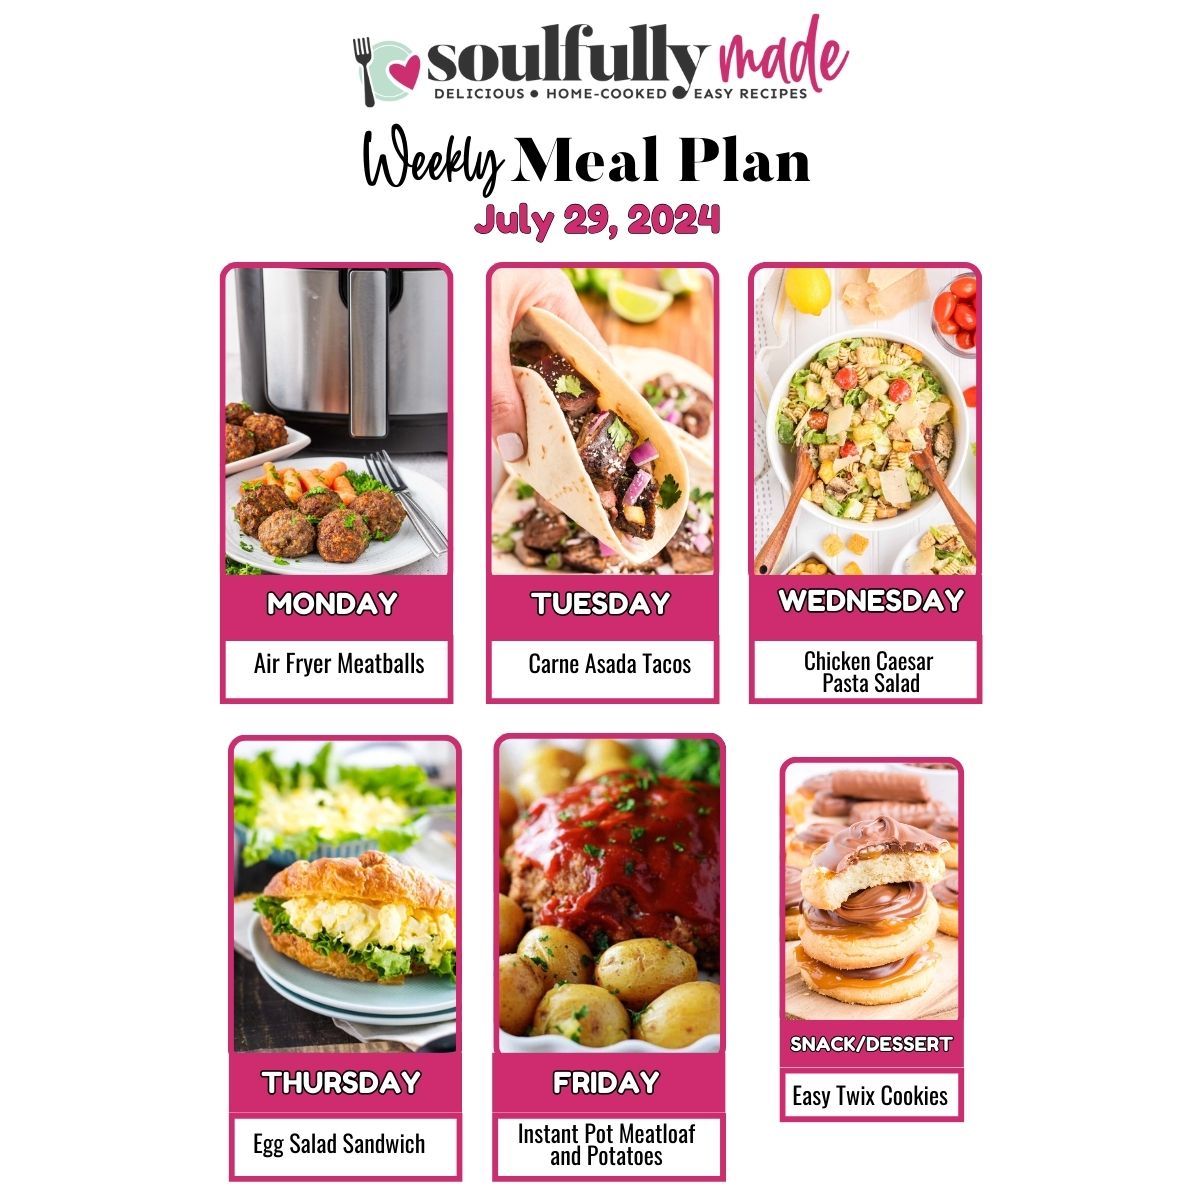 Weekly meal plan collage for July 29, 2024, including air fryer meatballs, Carne, Asada, tacos, chicken, Caesar, pasta, salad, egg, salad, sandwiches, instant pot, meatloaf, and potatoes, and for dessert easy Twix cookies.